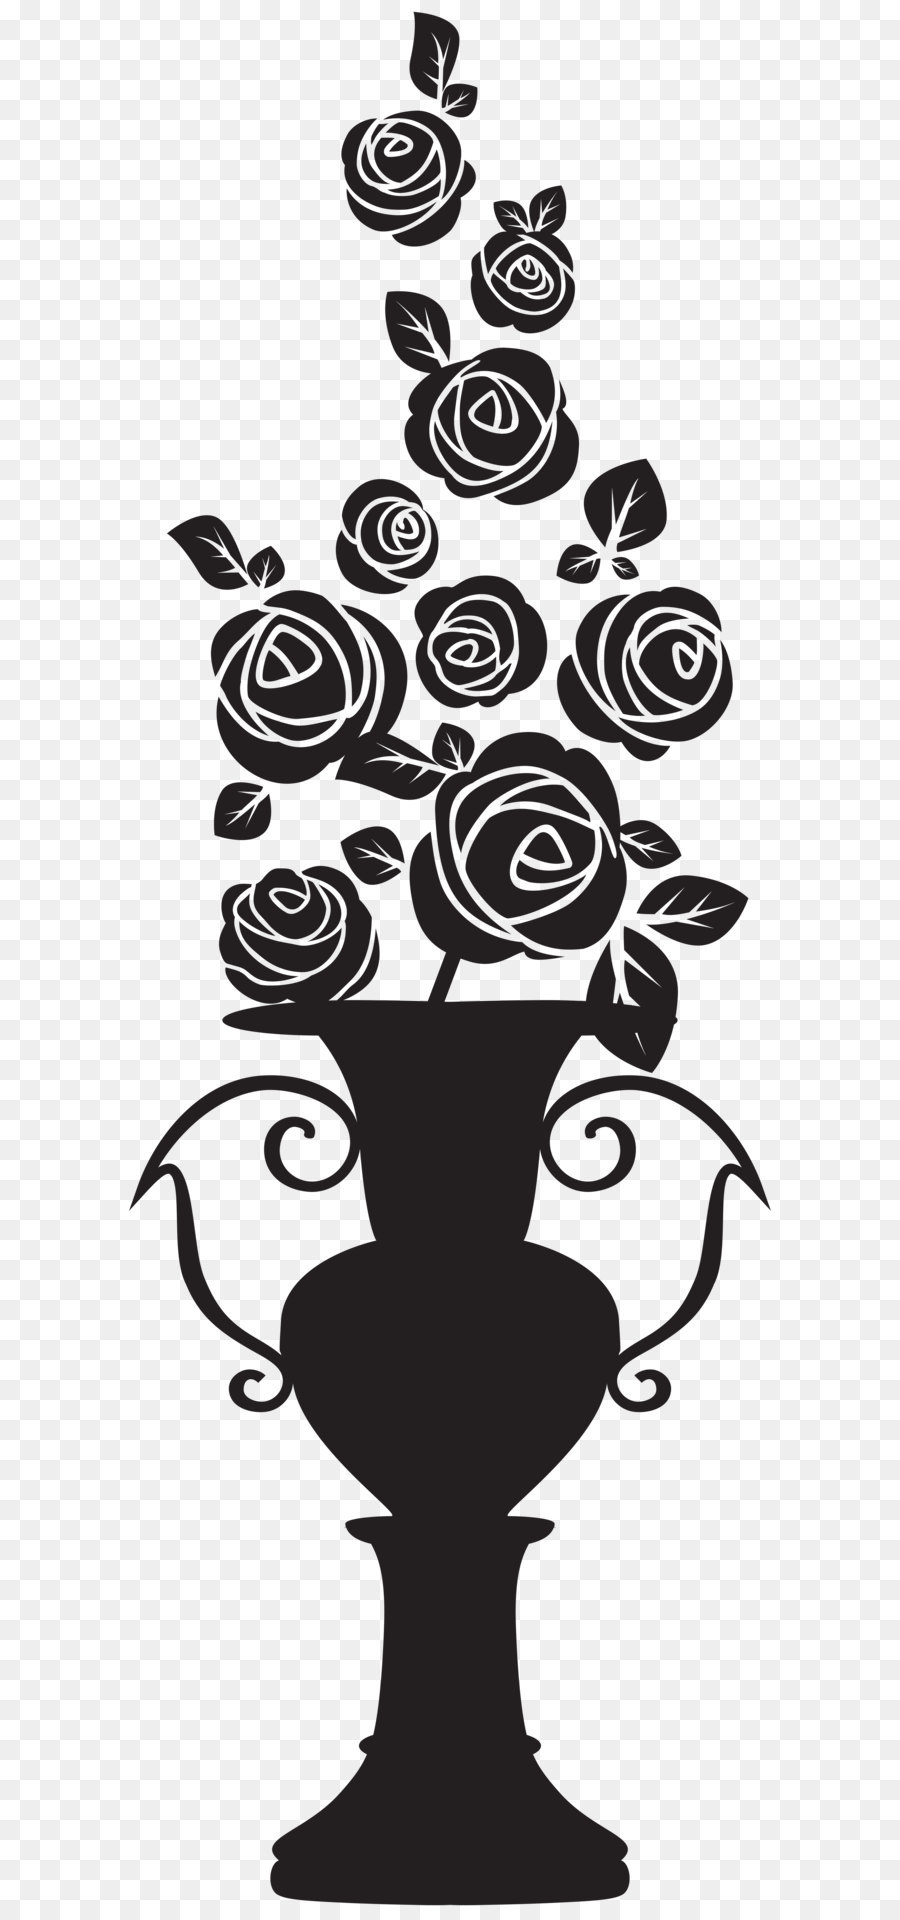 Portable Network Graphics Clip art Flower Vector graphics Rose - flowers silhouette png download - 764*1280 - Free Transparent Flower png Download.